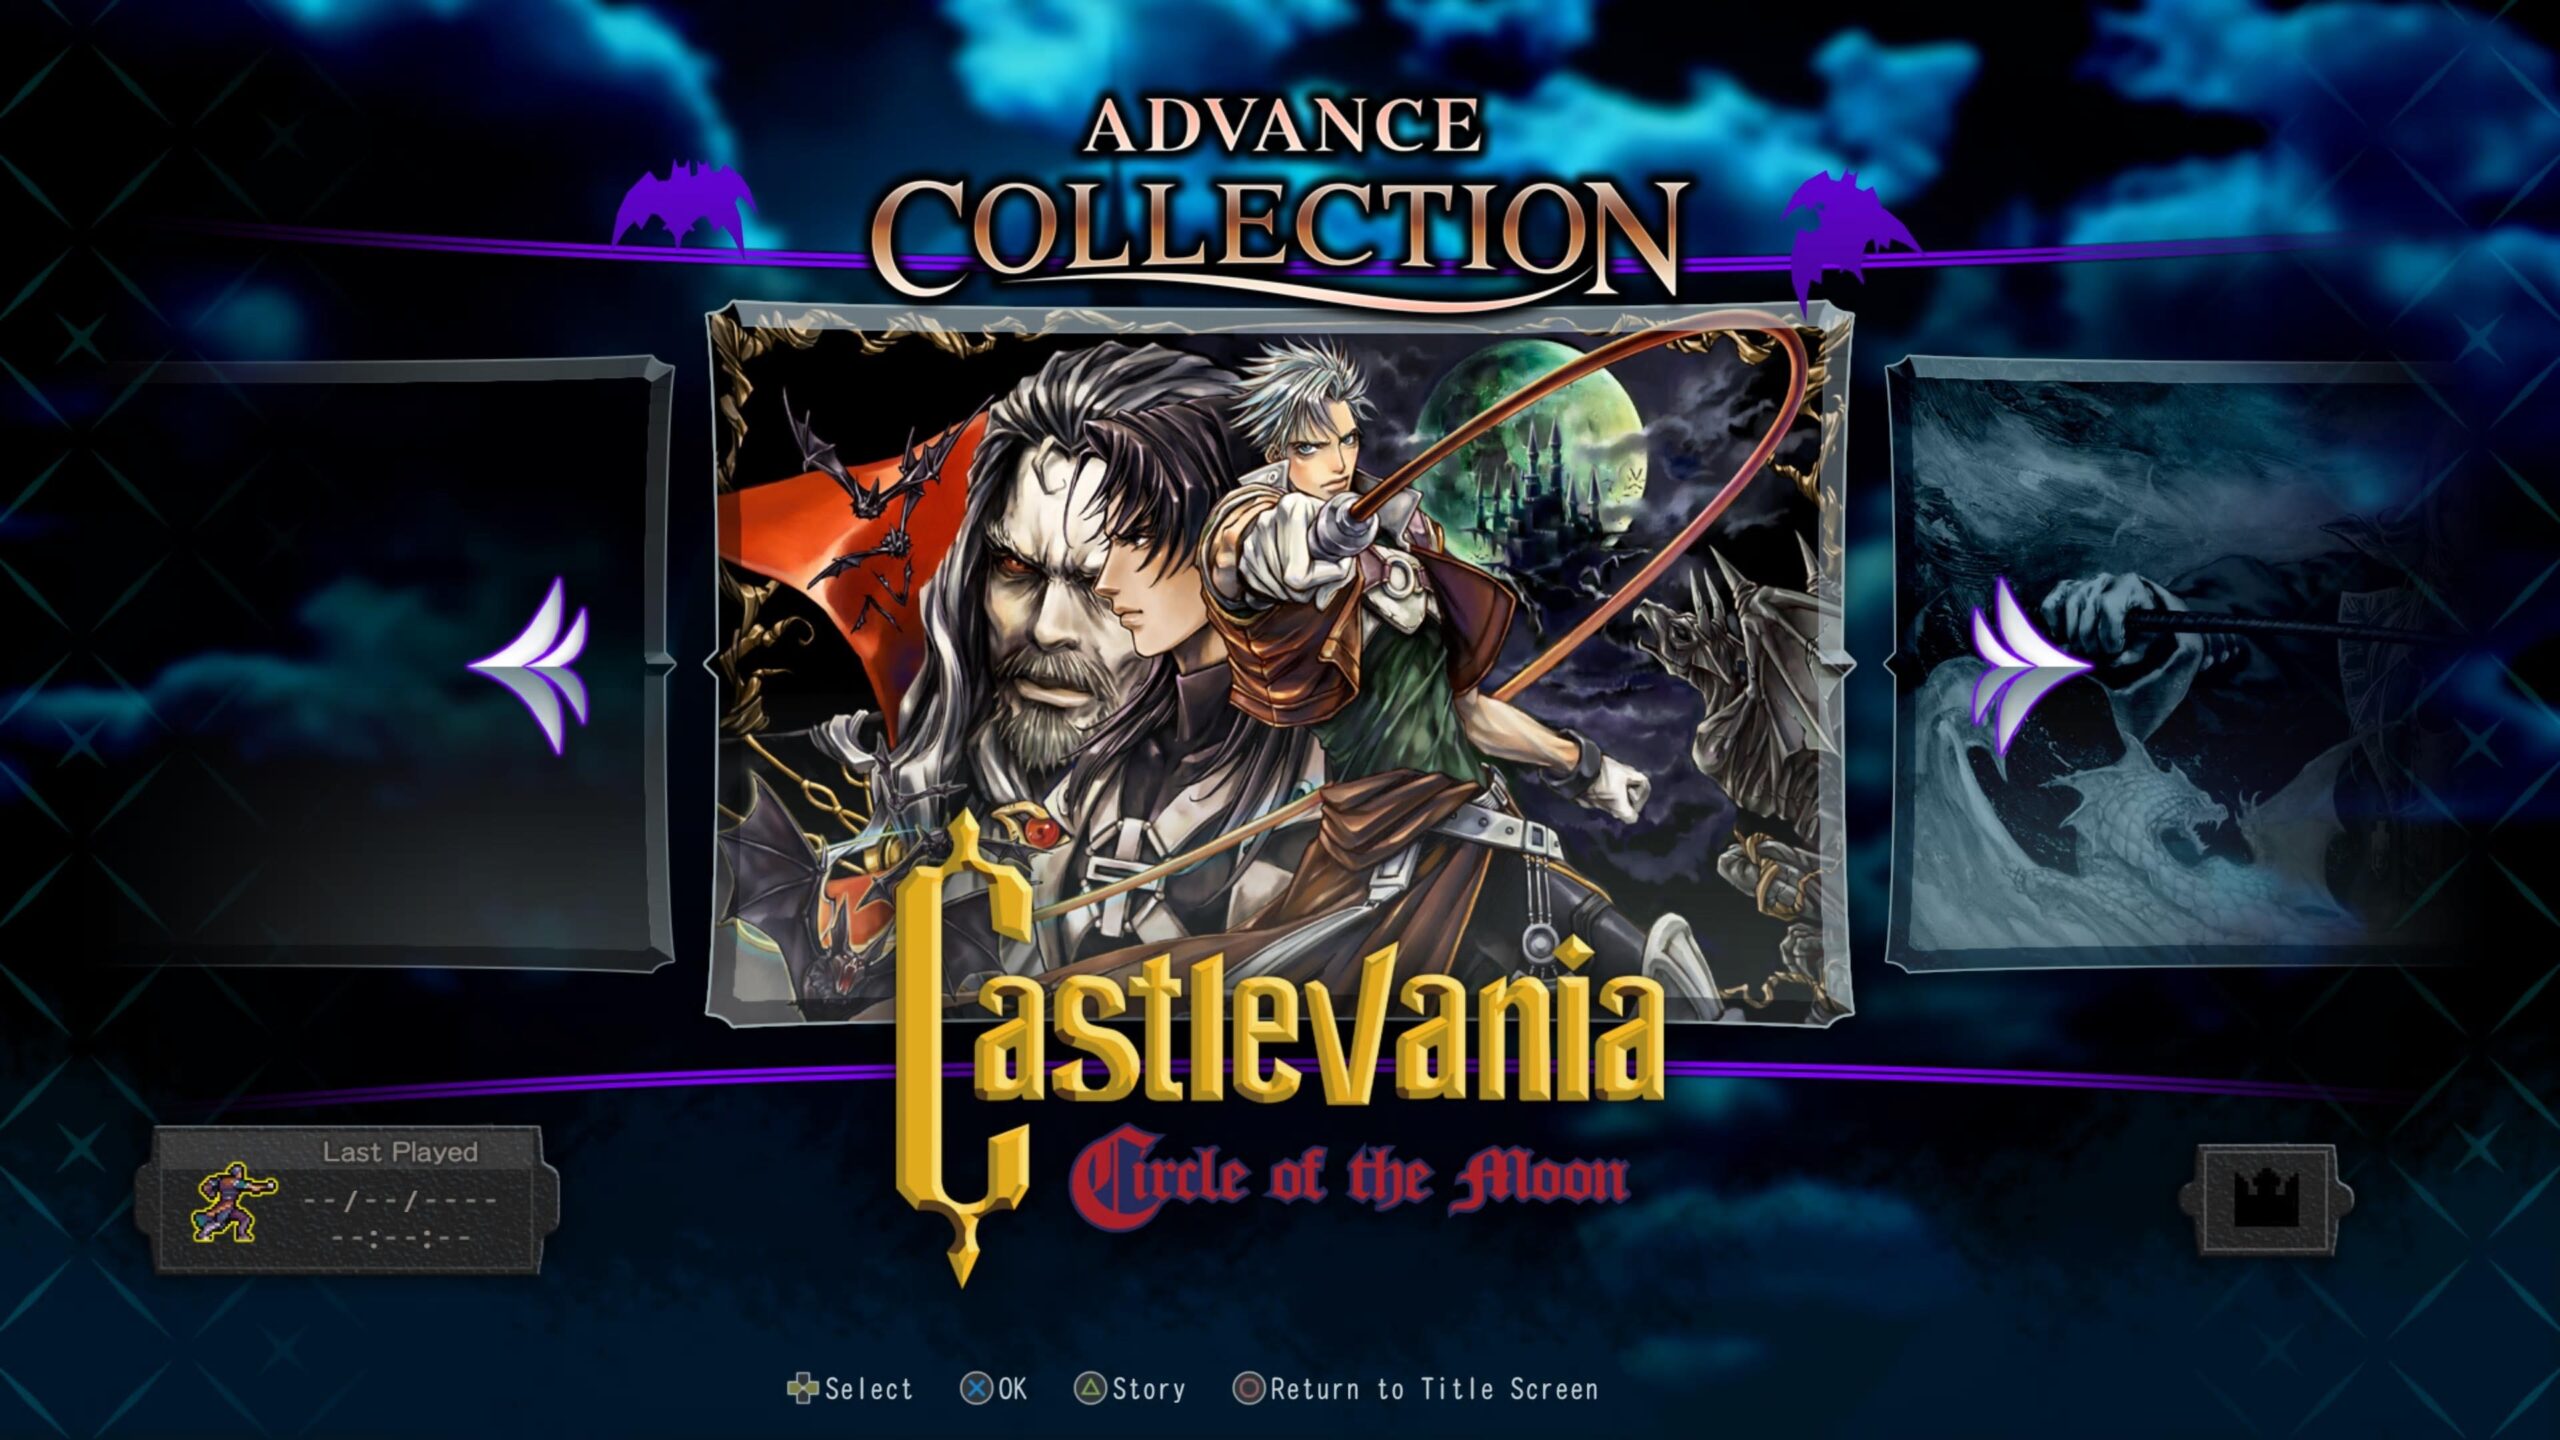 Advance collection. Castlevania Advanced collection. Кастлевания свитч. Castlevania Advance. Castlevania Advance collection game.